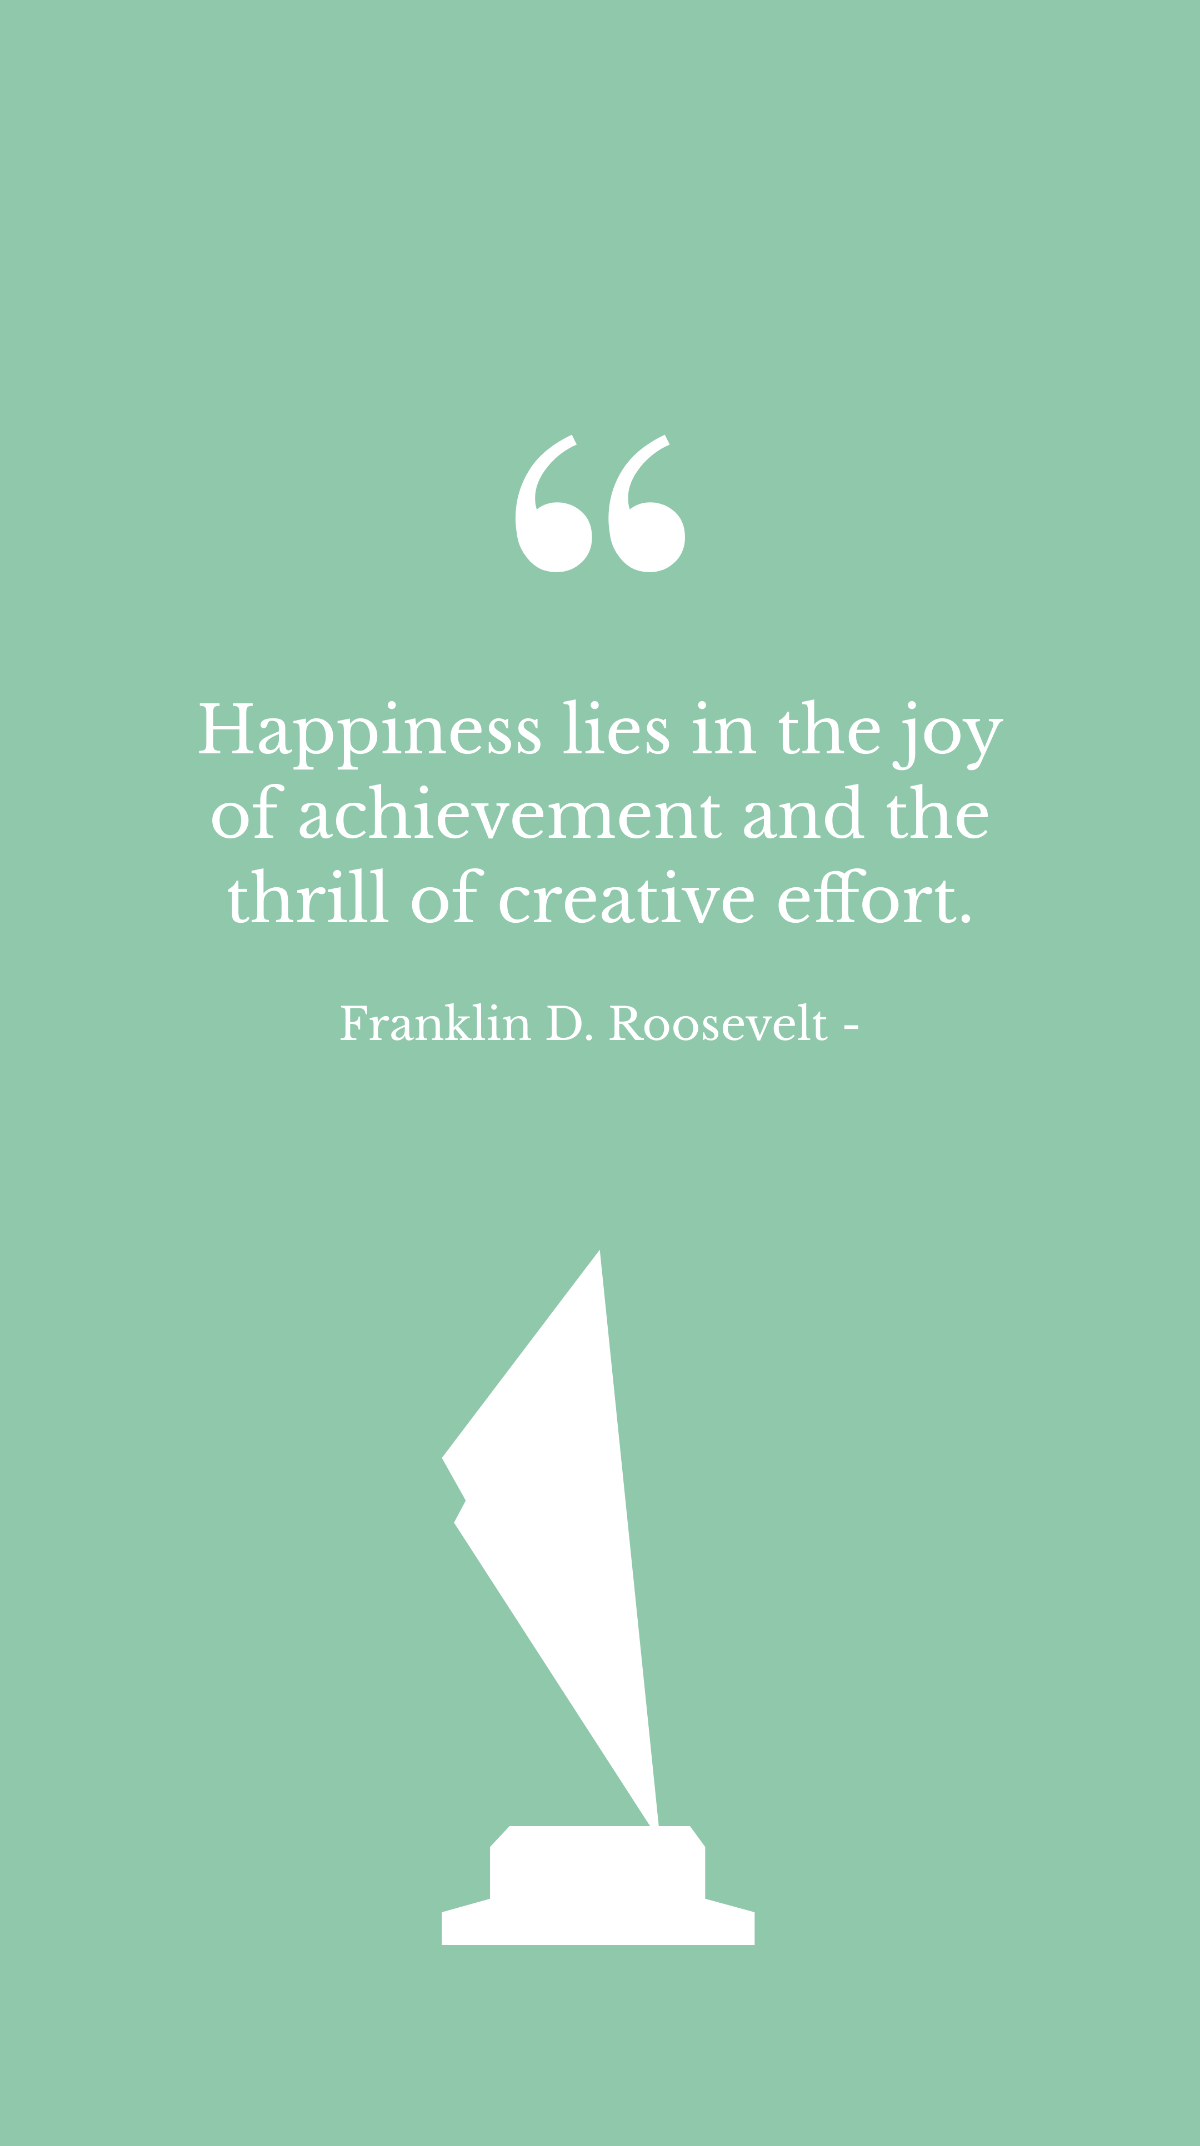 Franklin D. Roosevelt - Happiness lies in the joy of achievement and the thrill of creative effort.